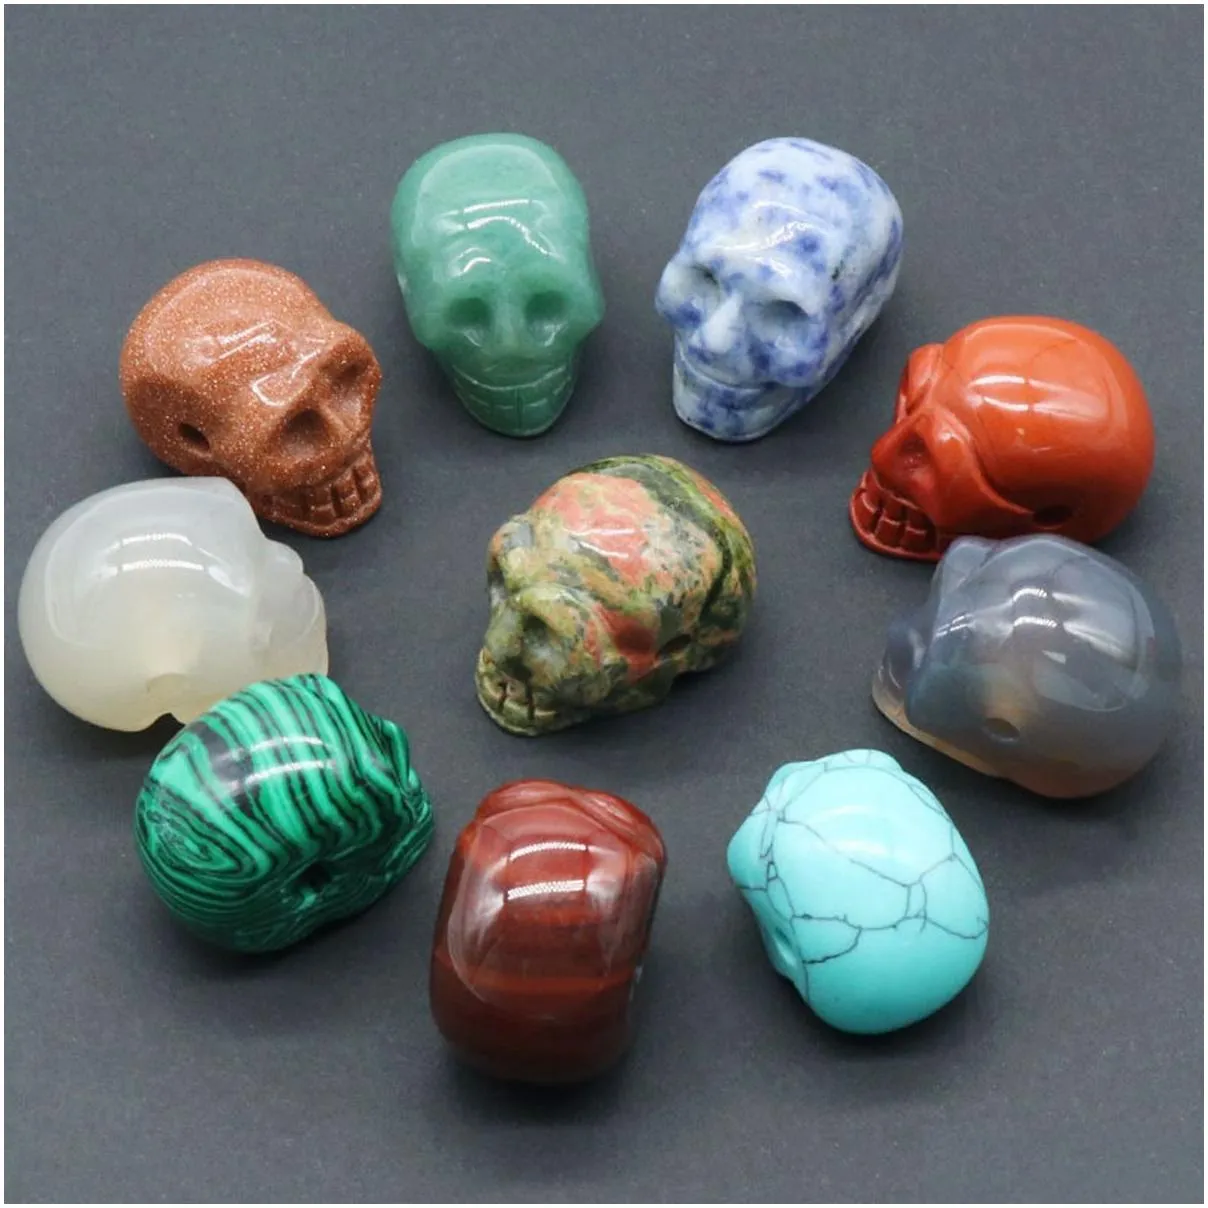 23mm Natural Obsidian Skull Head Statue Hand Carved Gemstone Human Skeleton Head Figurines Reiki Healing Stone for Home Office